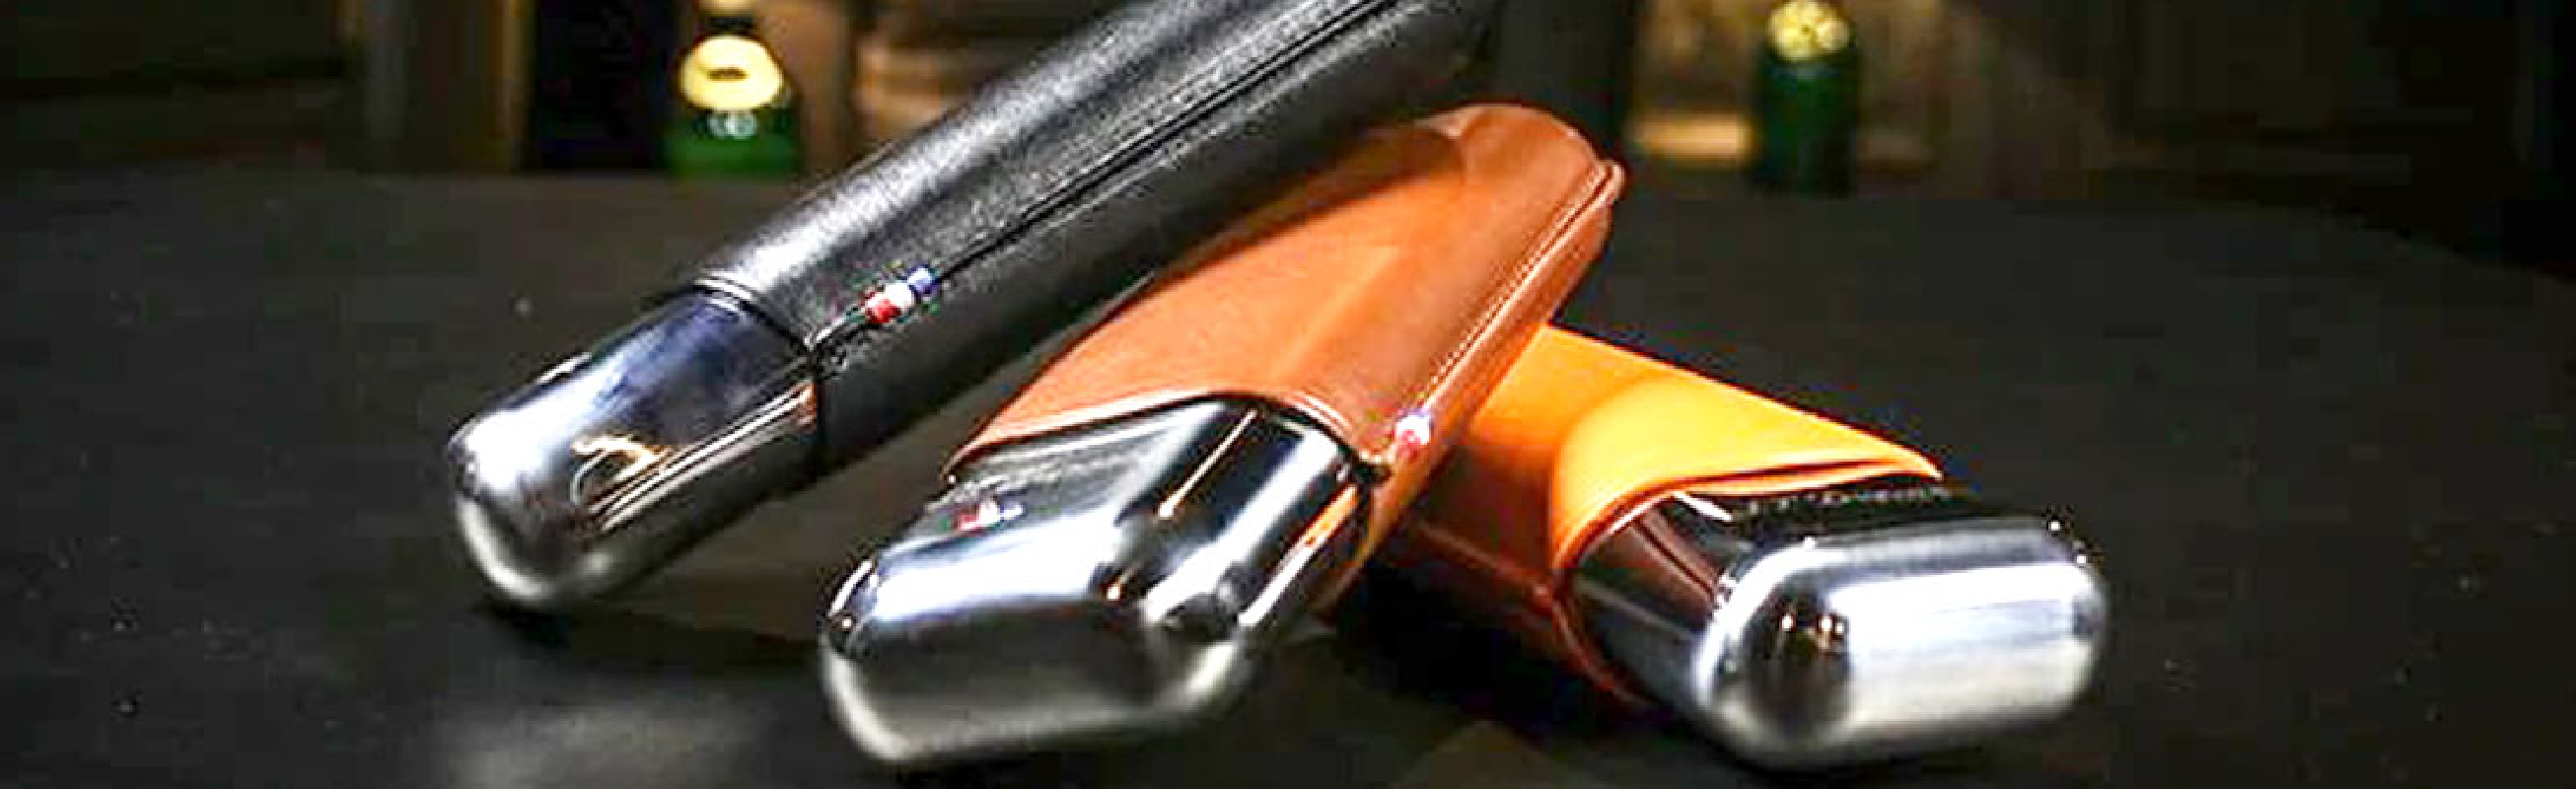 GENUINE LEATHER CIGAR CASE A HARD SHELL PROTECTING YOUR HABANOS